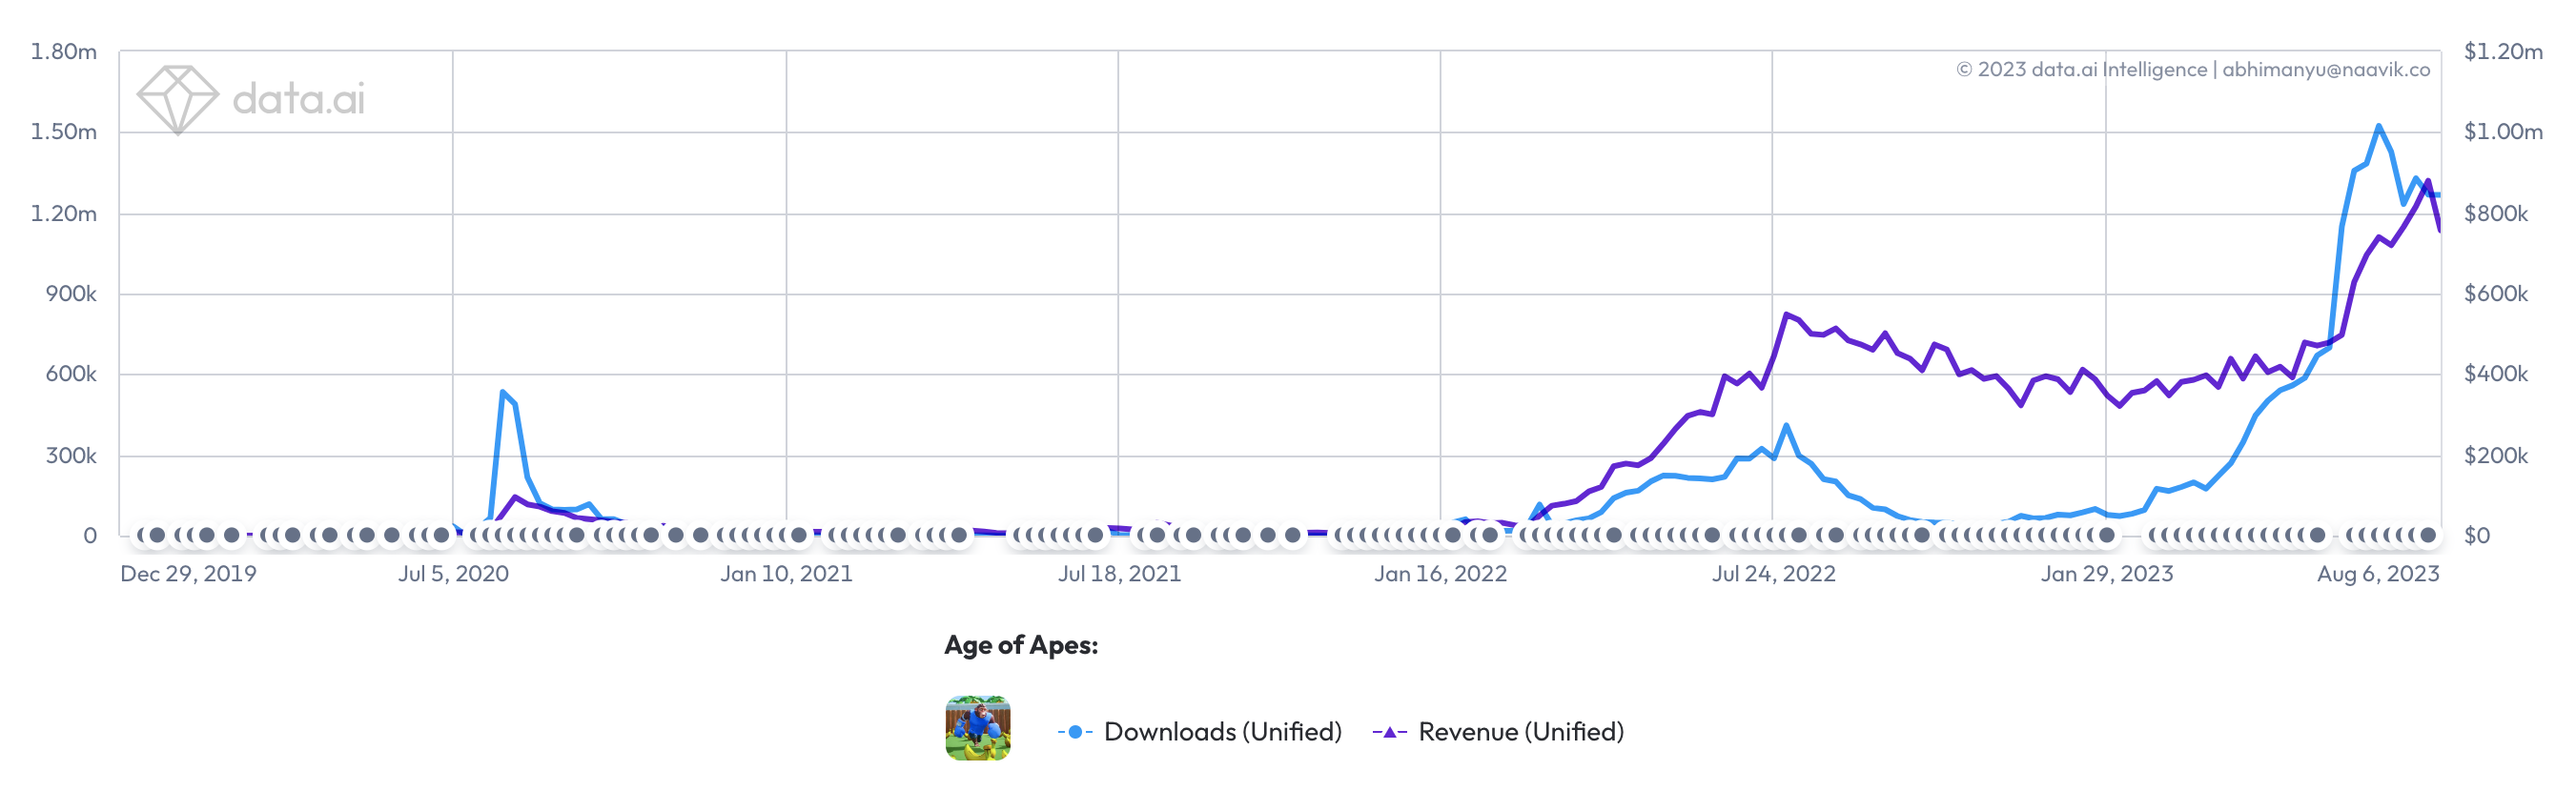 Age of Apes Download graph